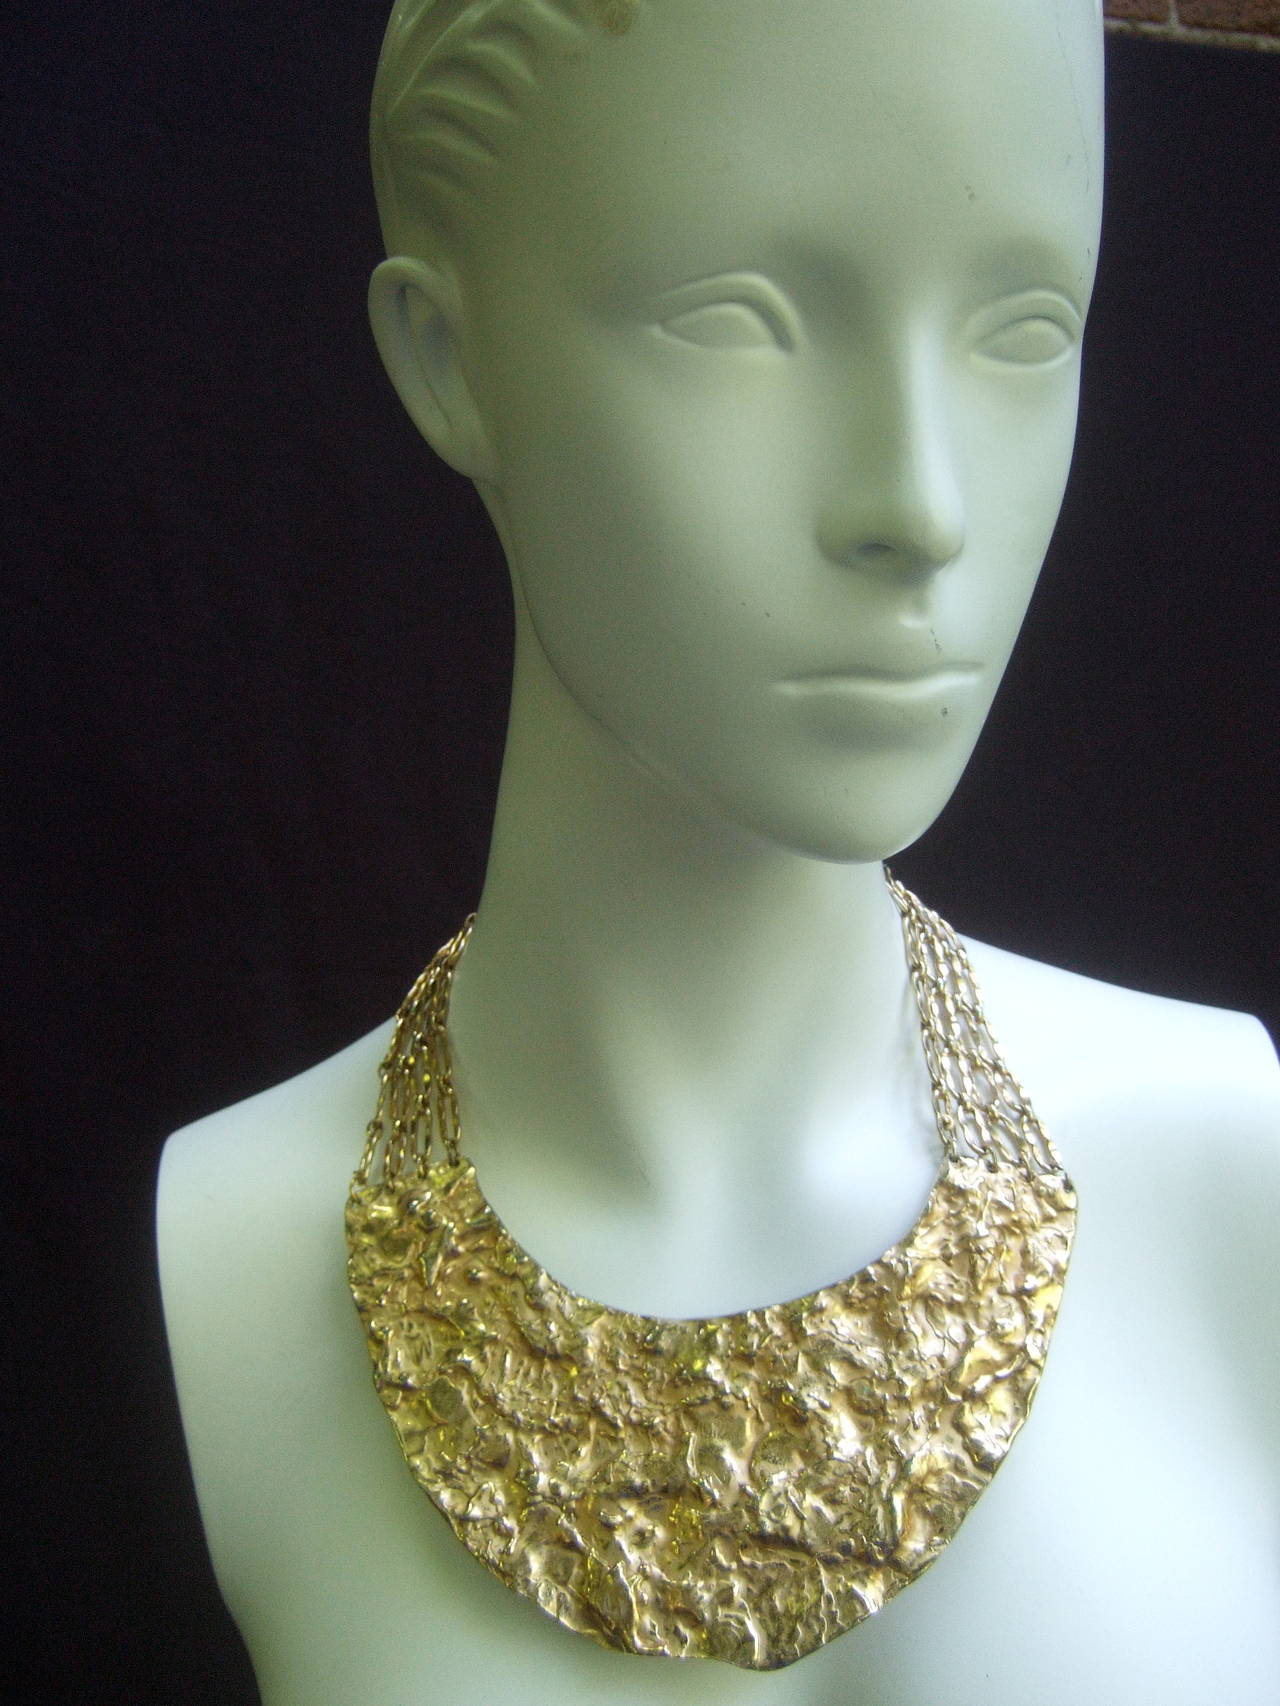 Massive Hammered Gilt Metal Collar Necklace c 1970 In Good Condition For Sale In University City, MO